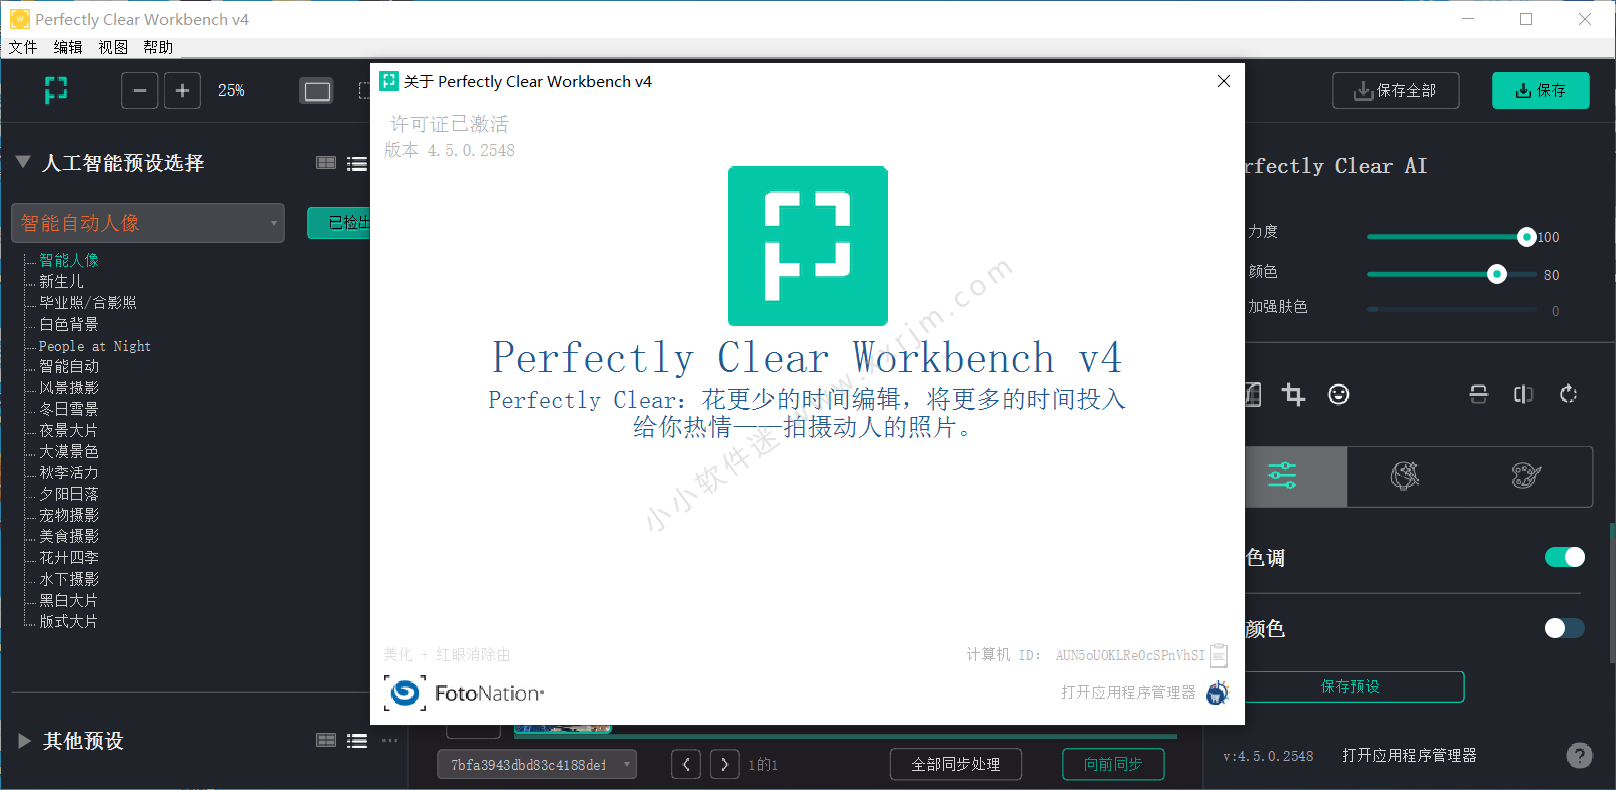 Perfectly Clear WorkBench 4.5.0.2548 instal the last version for ios